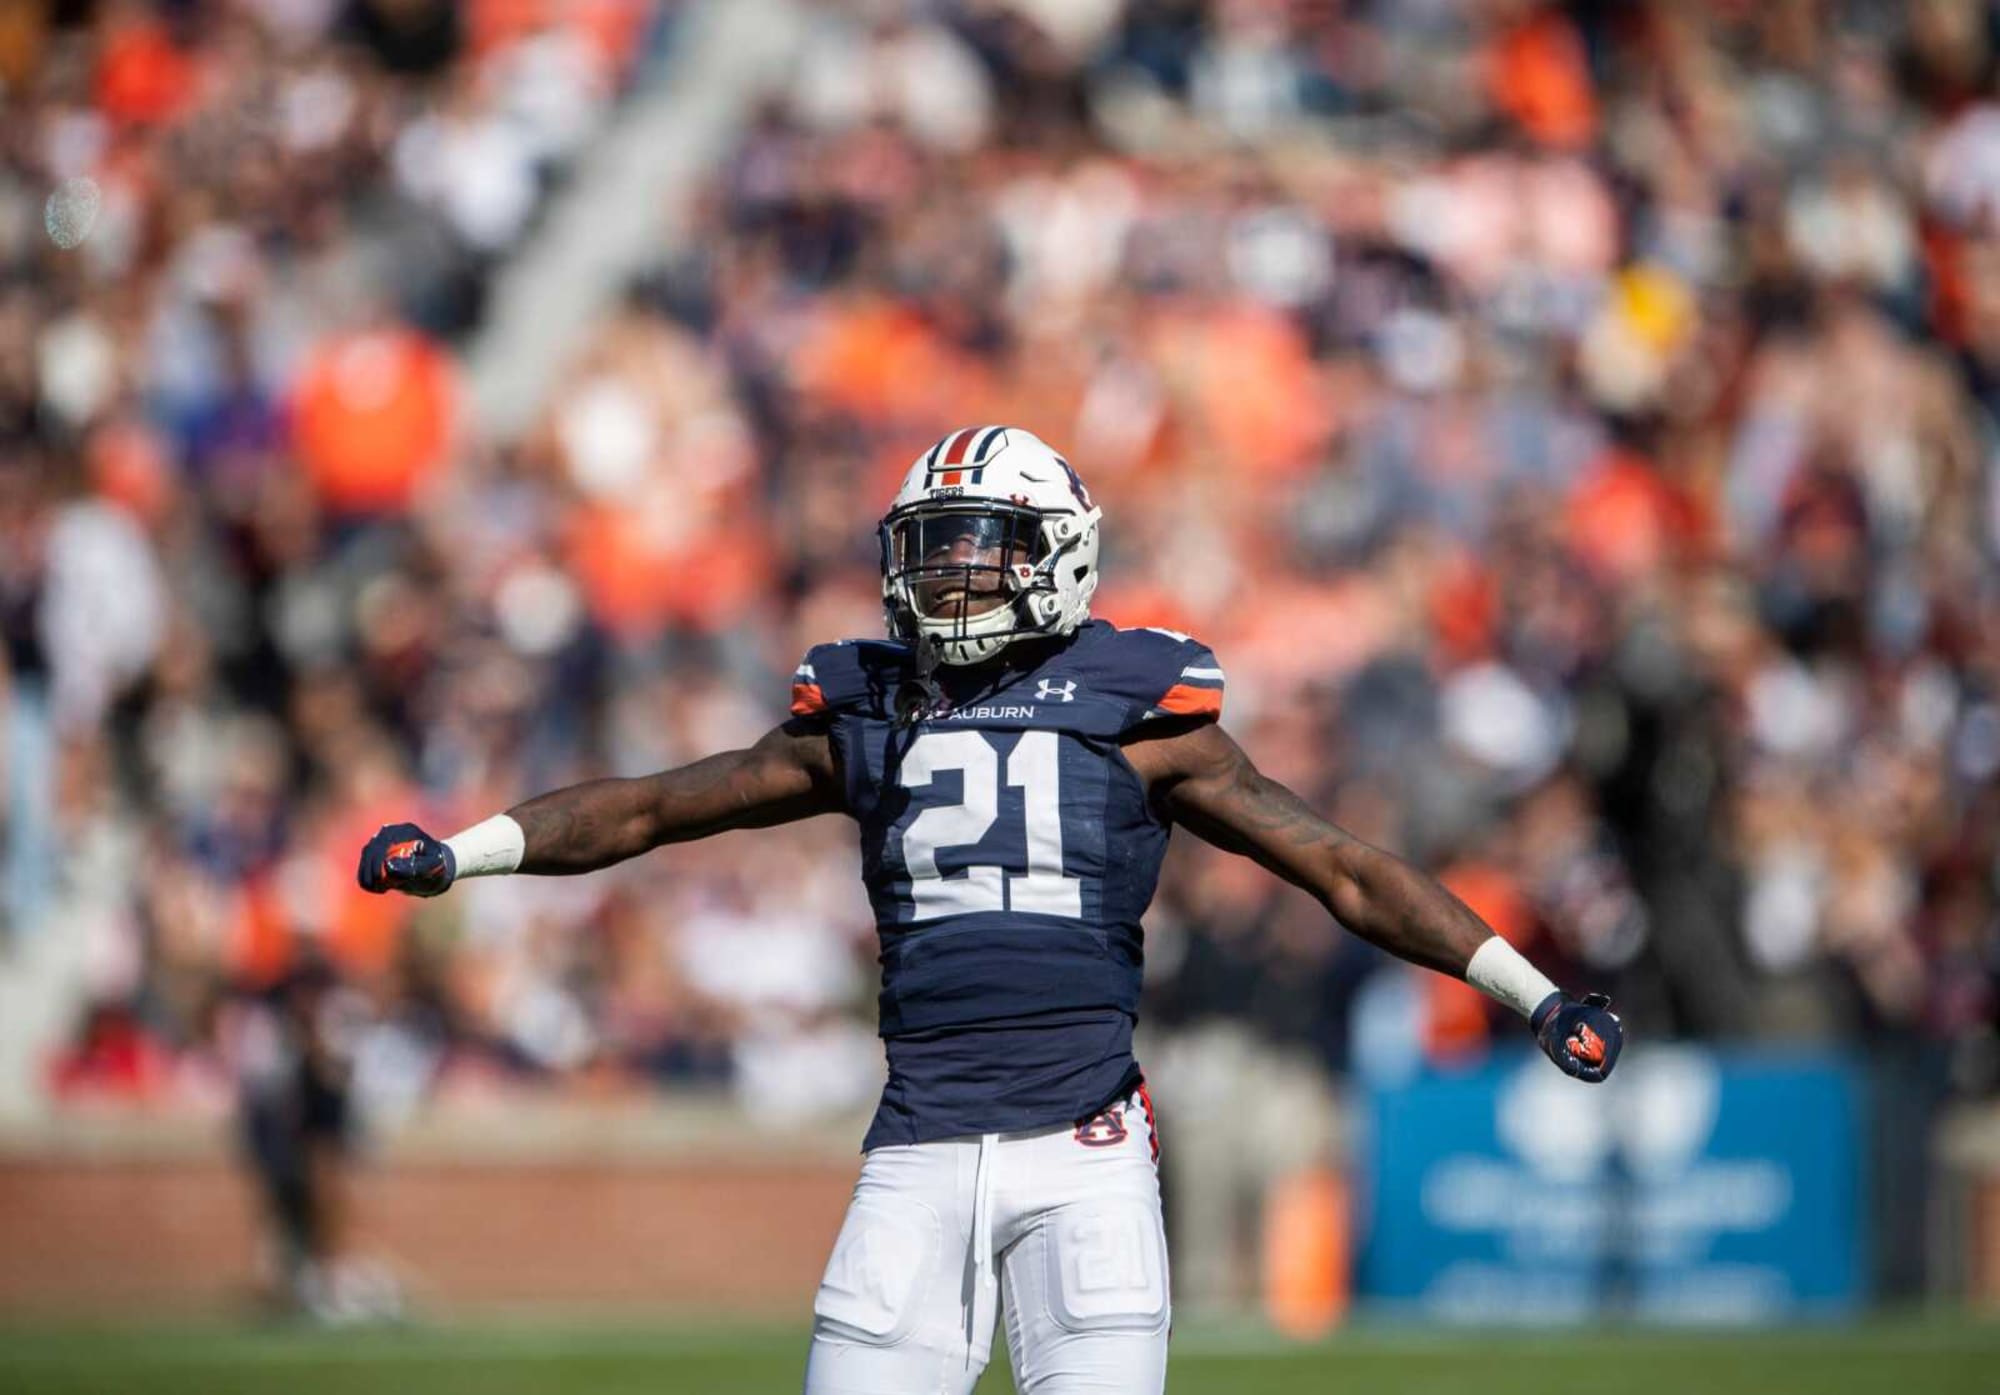 Auburn football: Could Smoke Monday join former teammates in NFL?